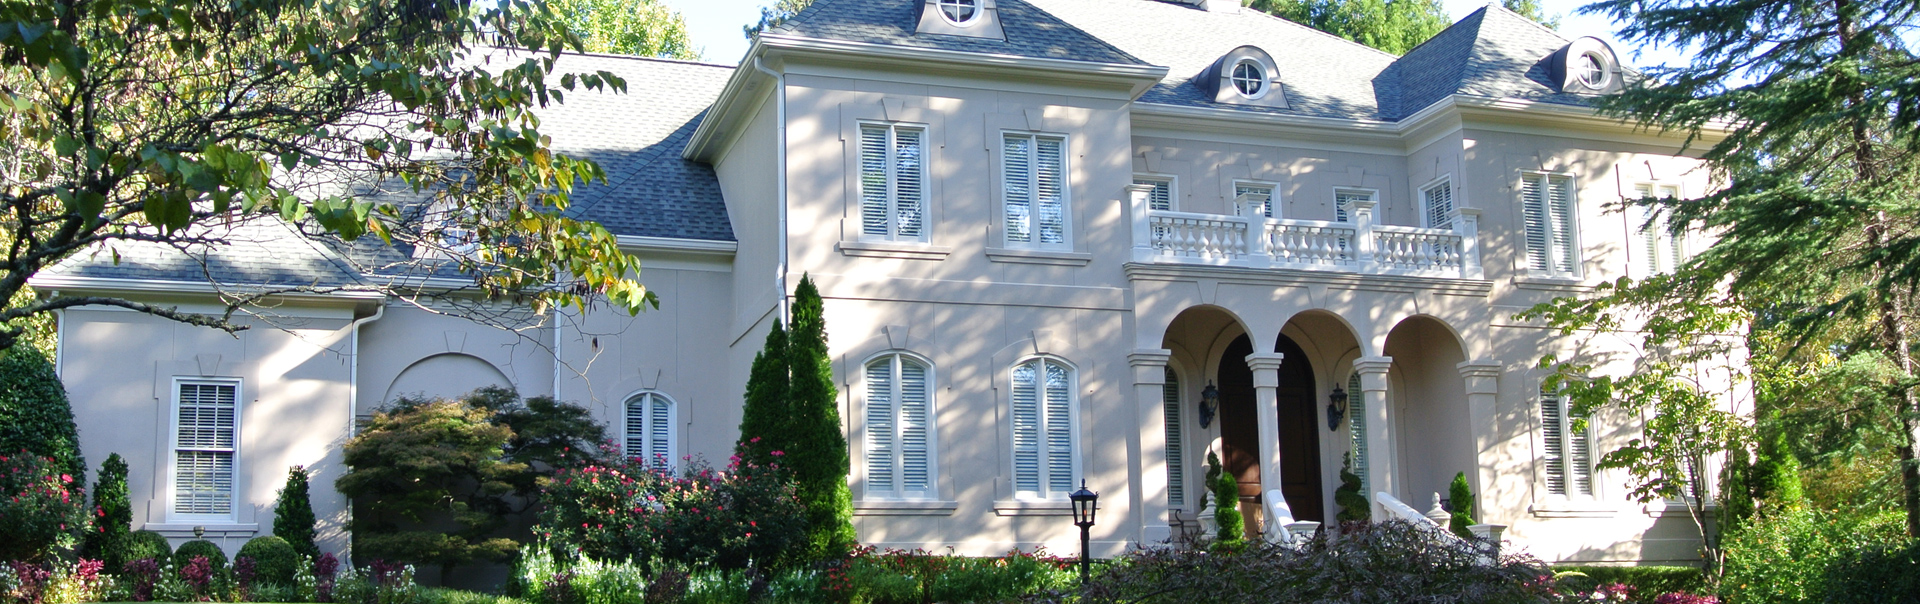 <h2>More than 2400 HOME owners chose us for stucco renovation or new installations</h2>
